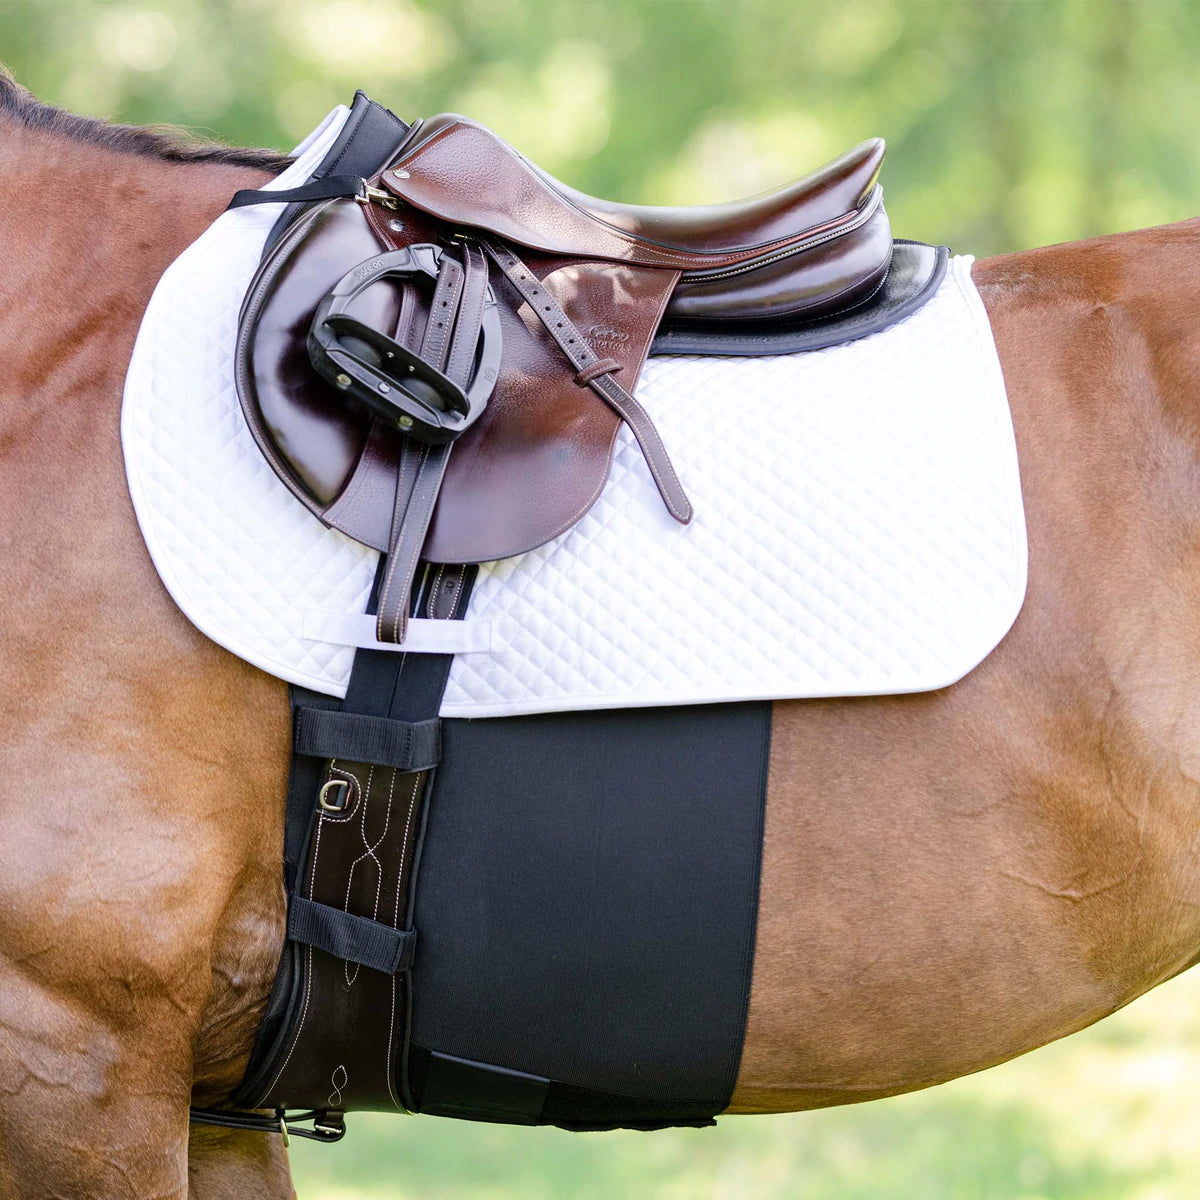 Equifit BellyBand+™